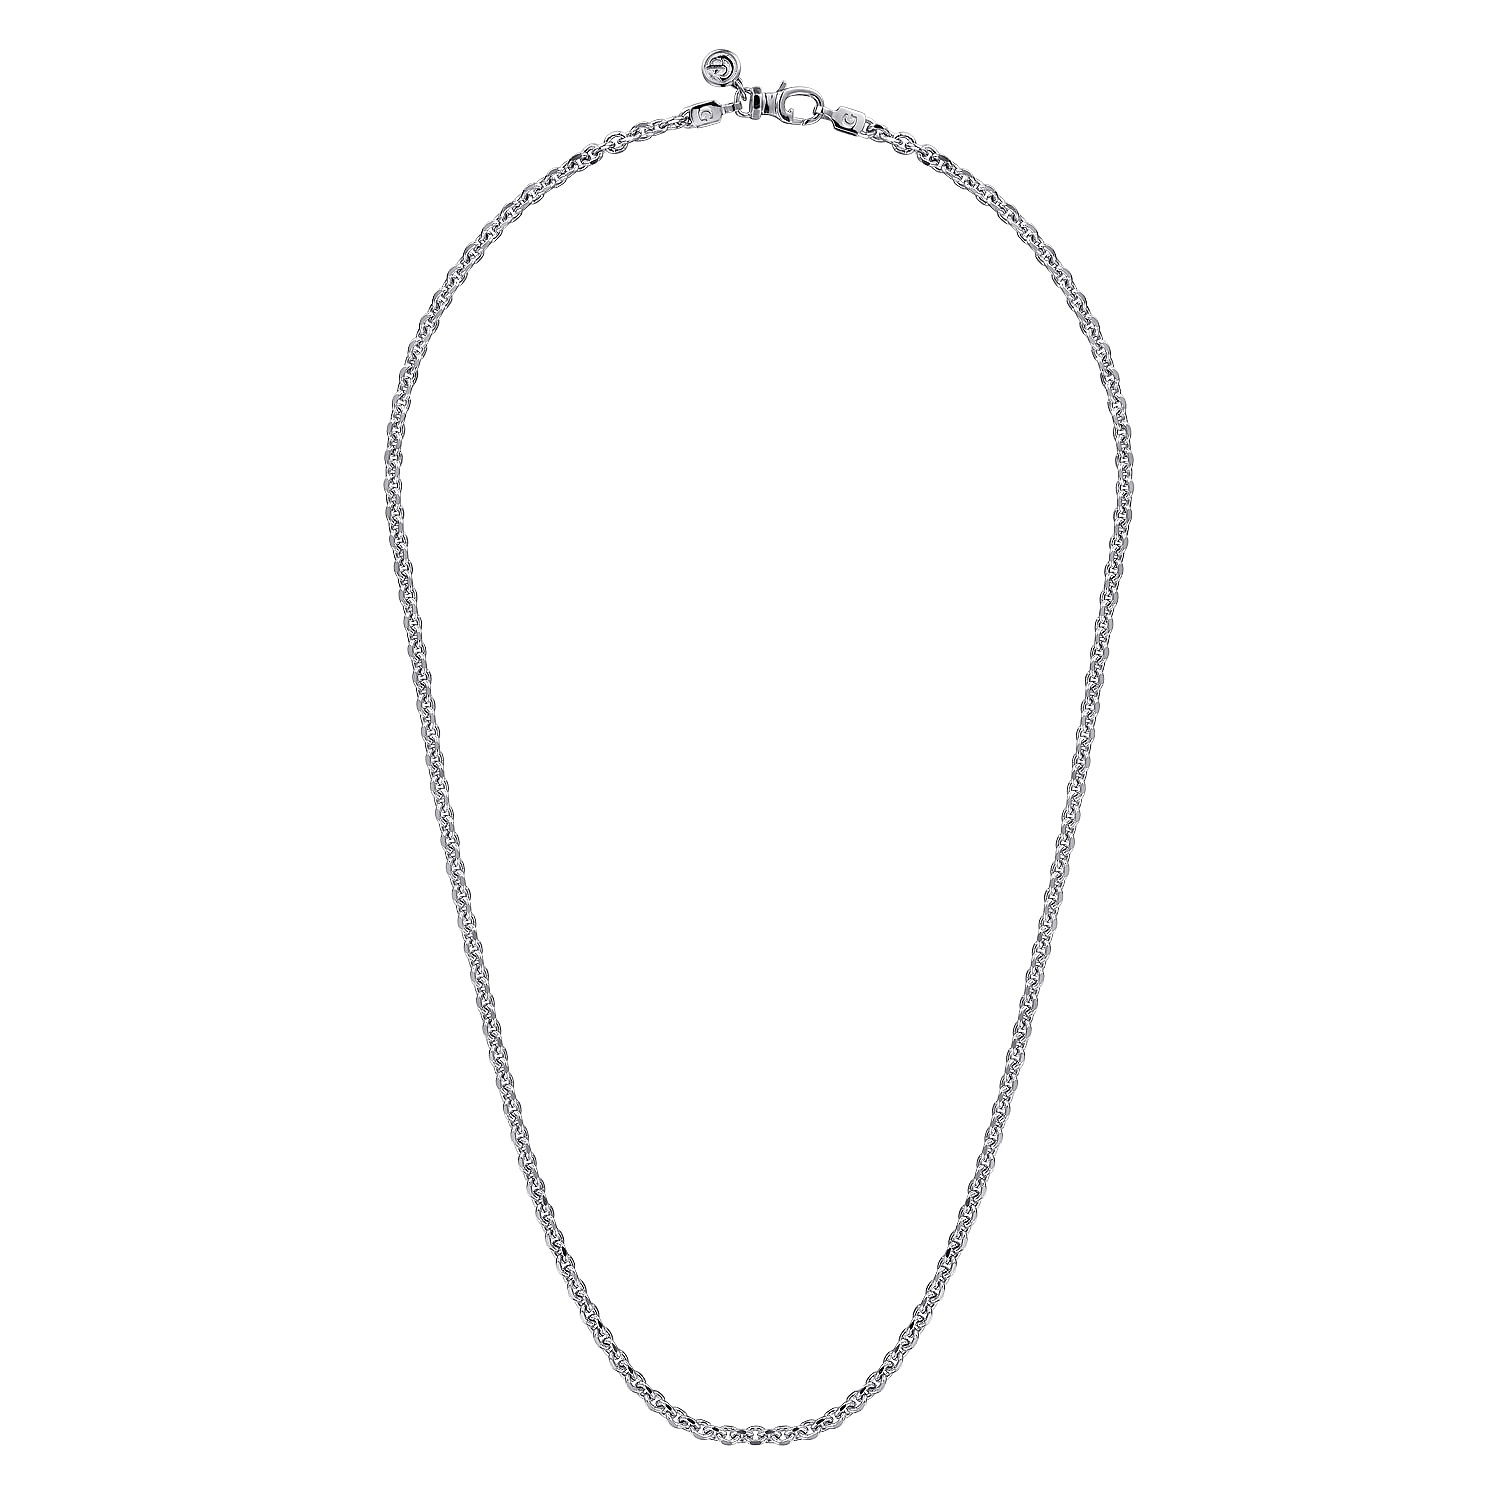 22 Inch 925 Sterling Silver Men's Link Chain Necklace 